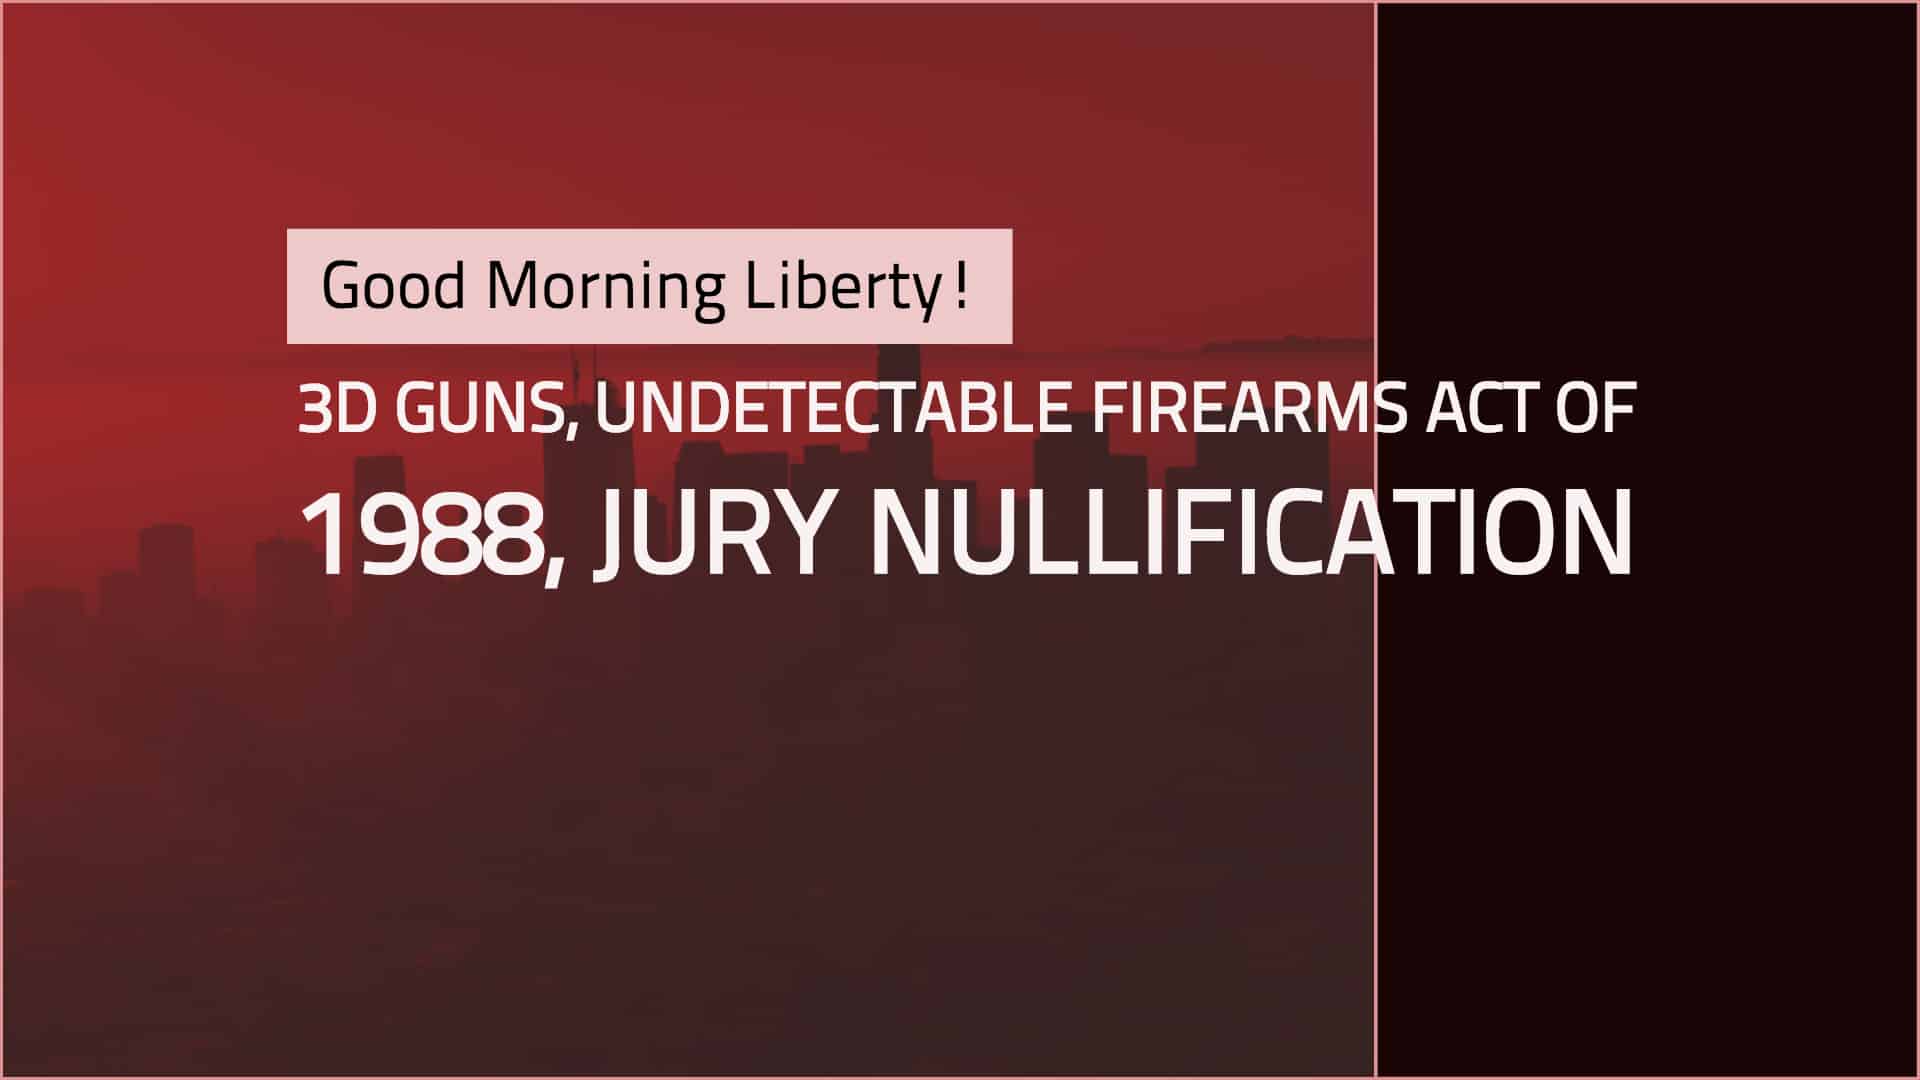 Good Morning Liberty 08-01-18: 3D Guns, Undetectable Firearms Act, Jury Nullification